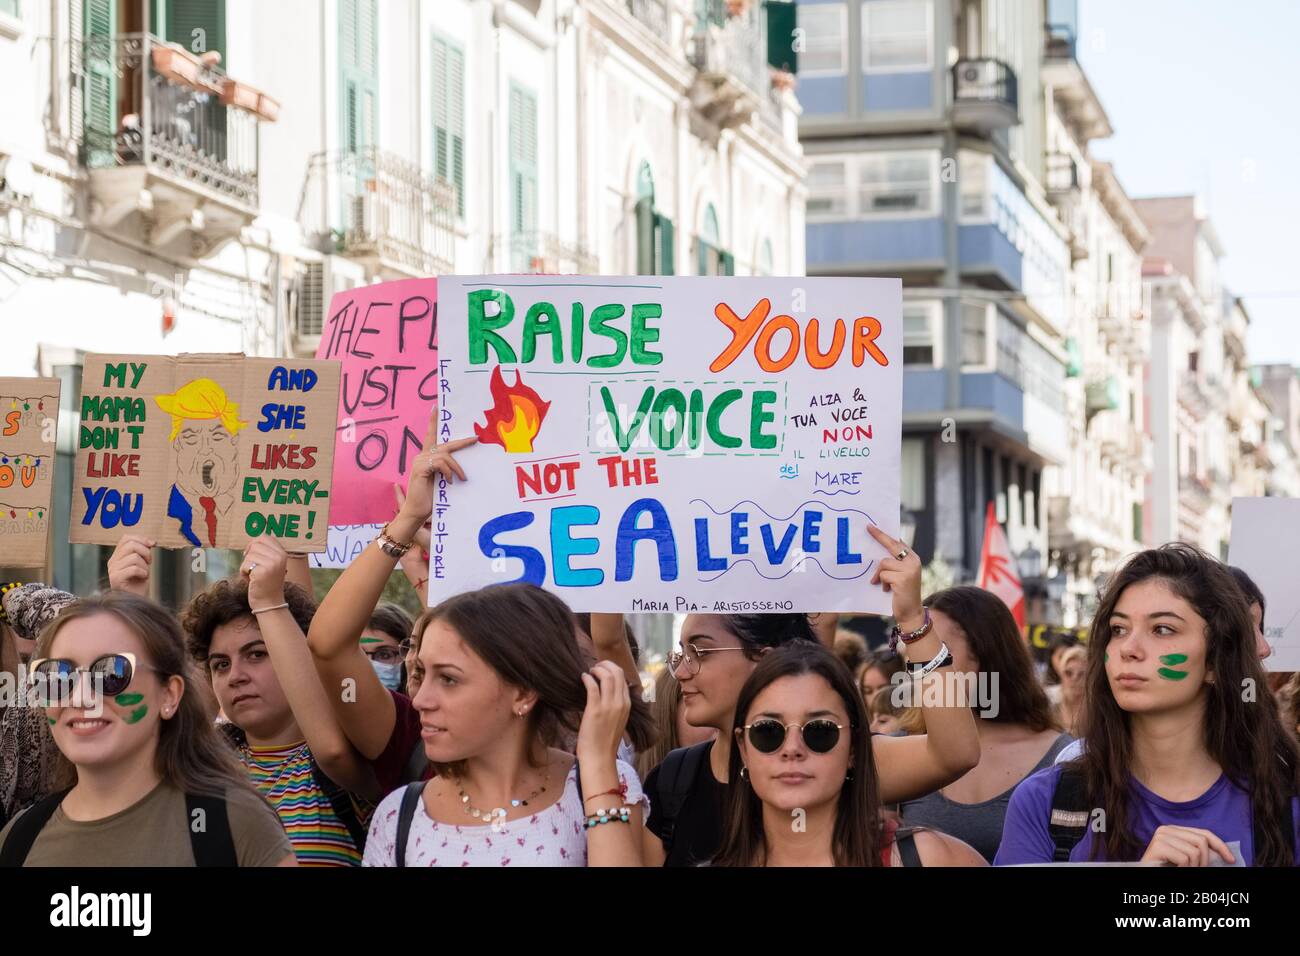 A procession made up of many young students protesting against climate change by displaying placards and banners with messages. Stock Photo